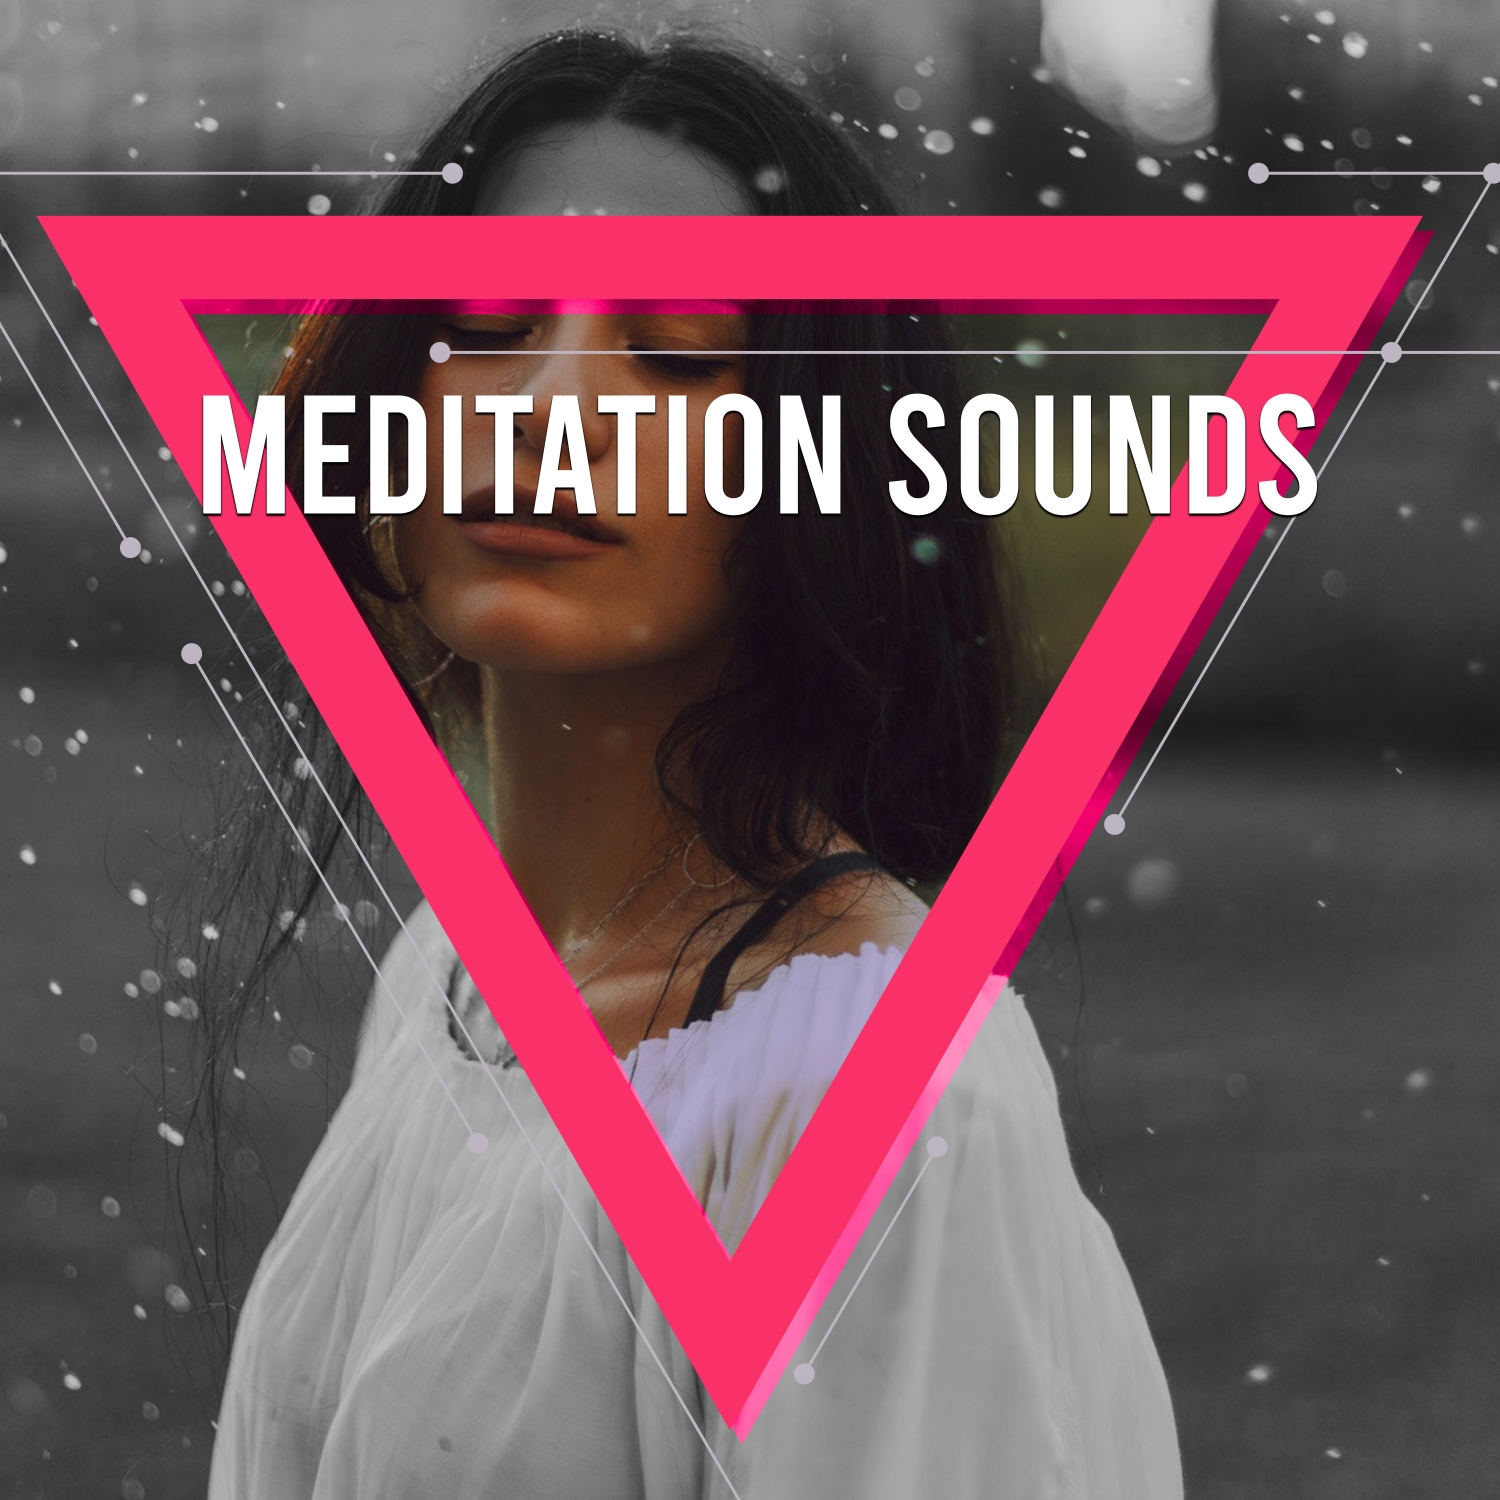 19 Meditation Sounds of Nature Rain and the Ocean - Tranquil